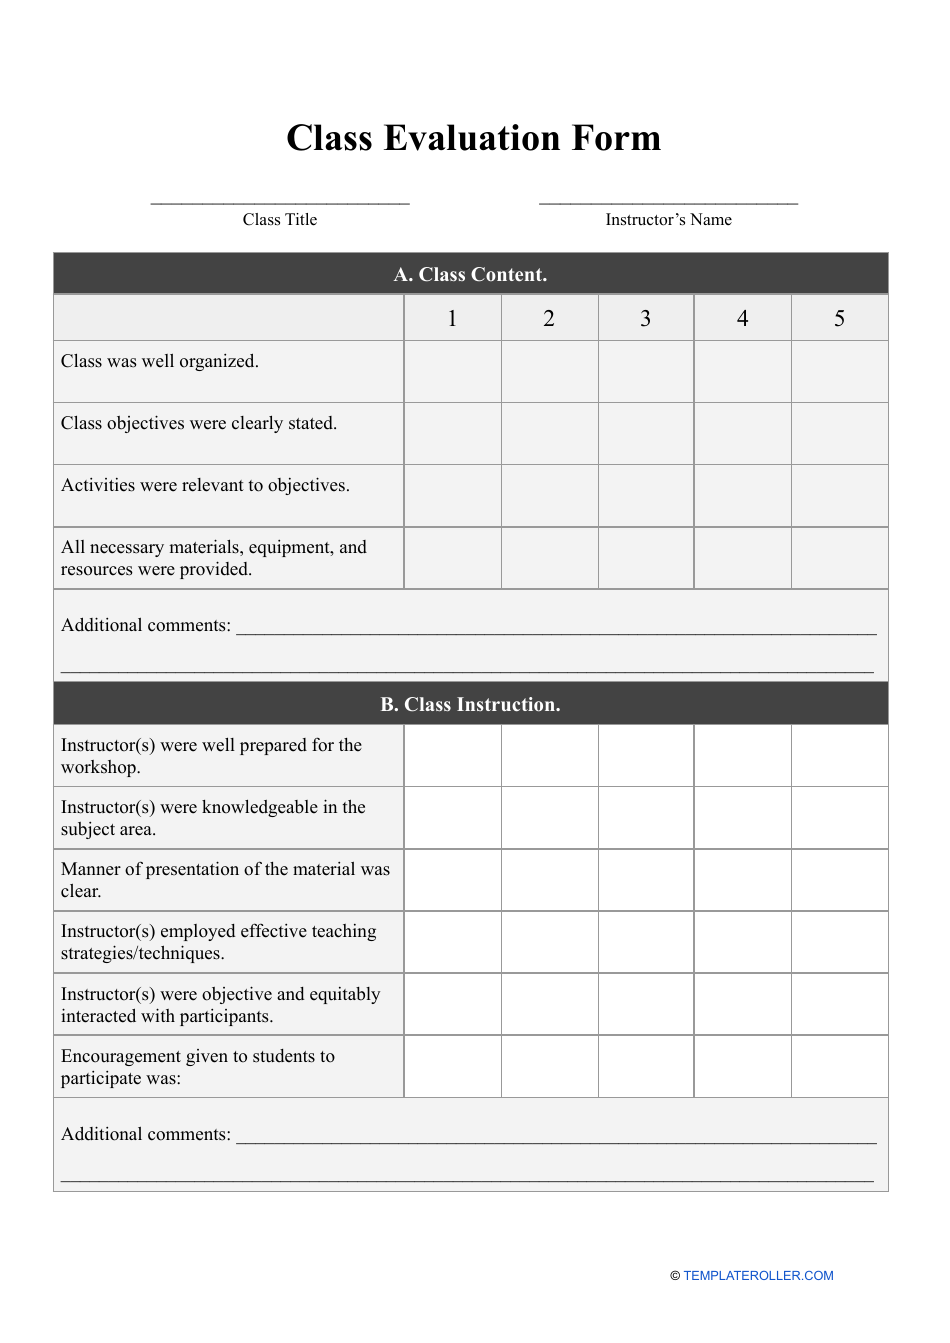 Class Evaluation Form, Page 1